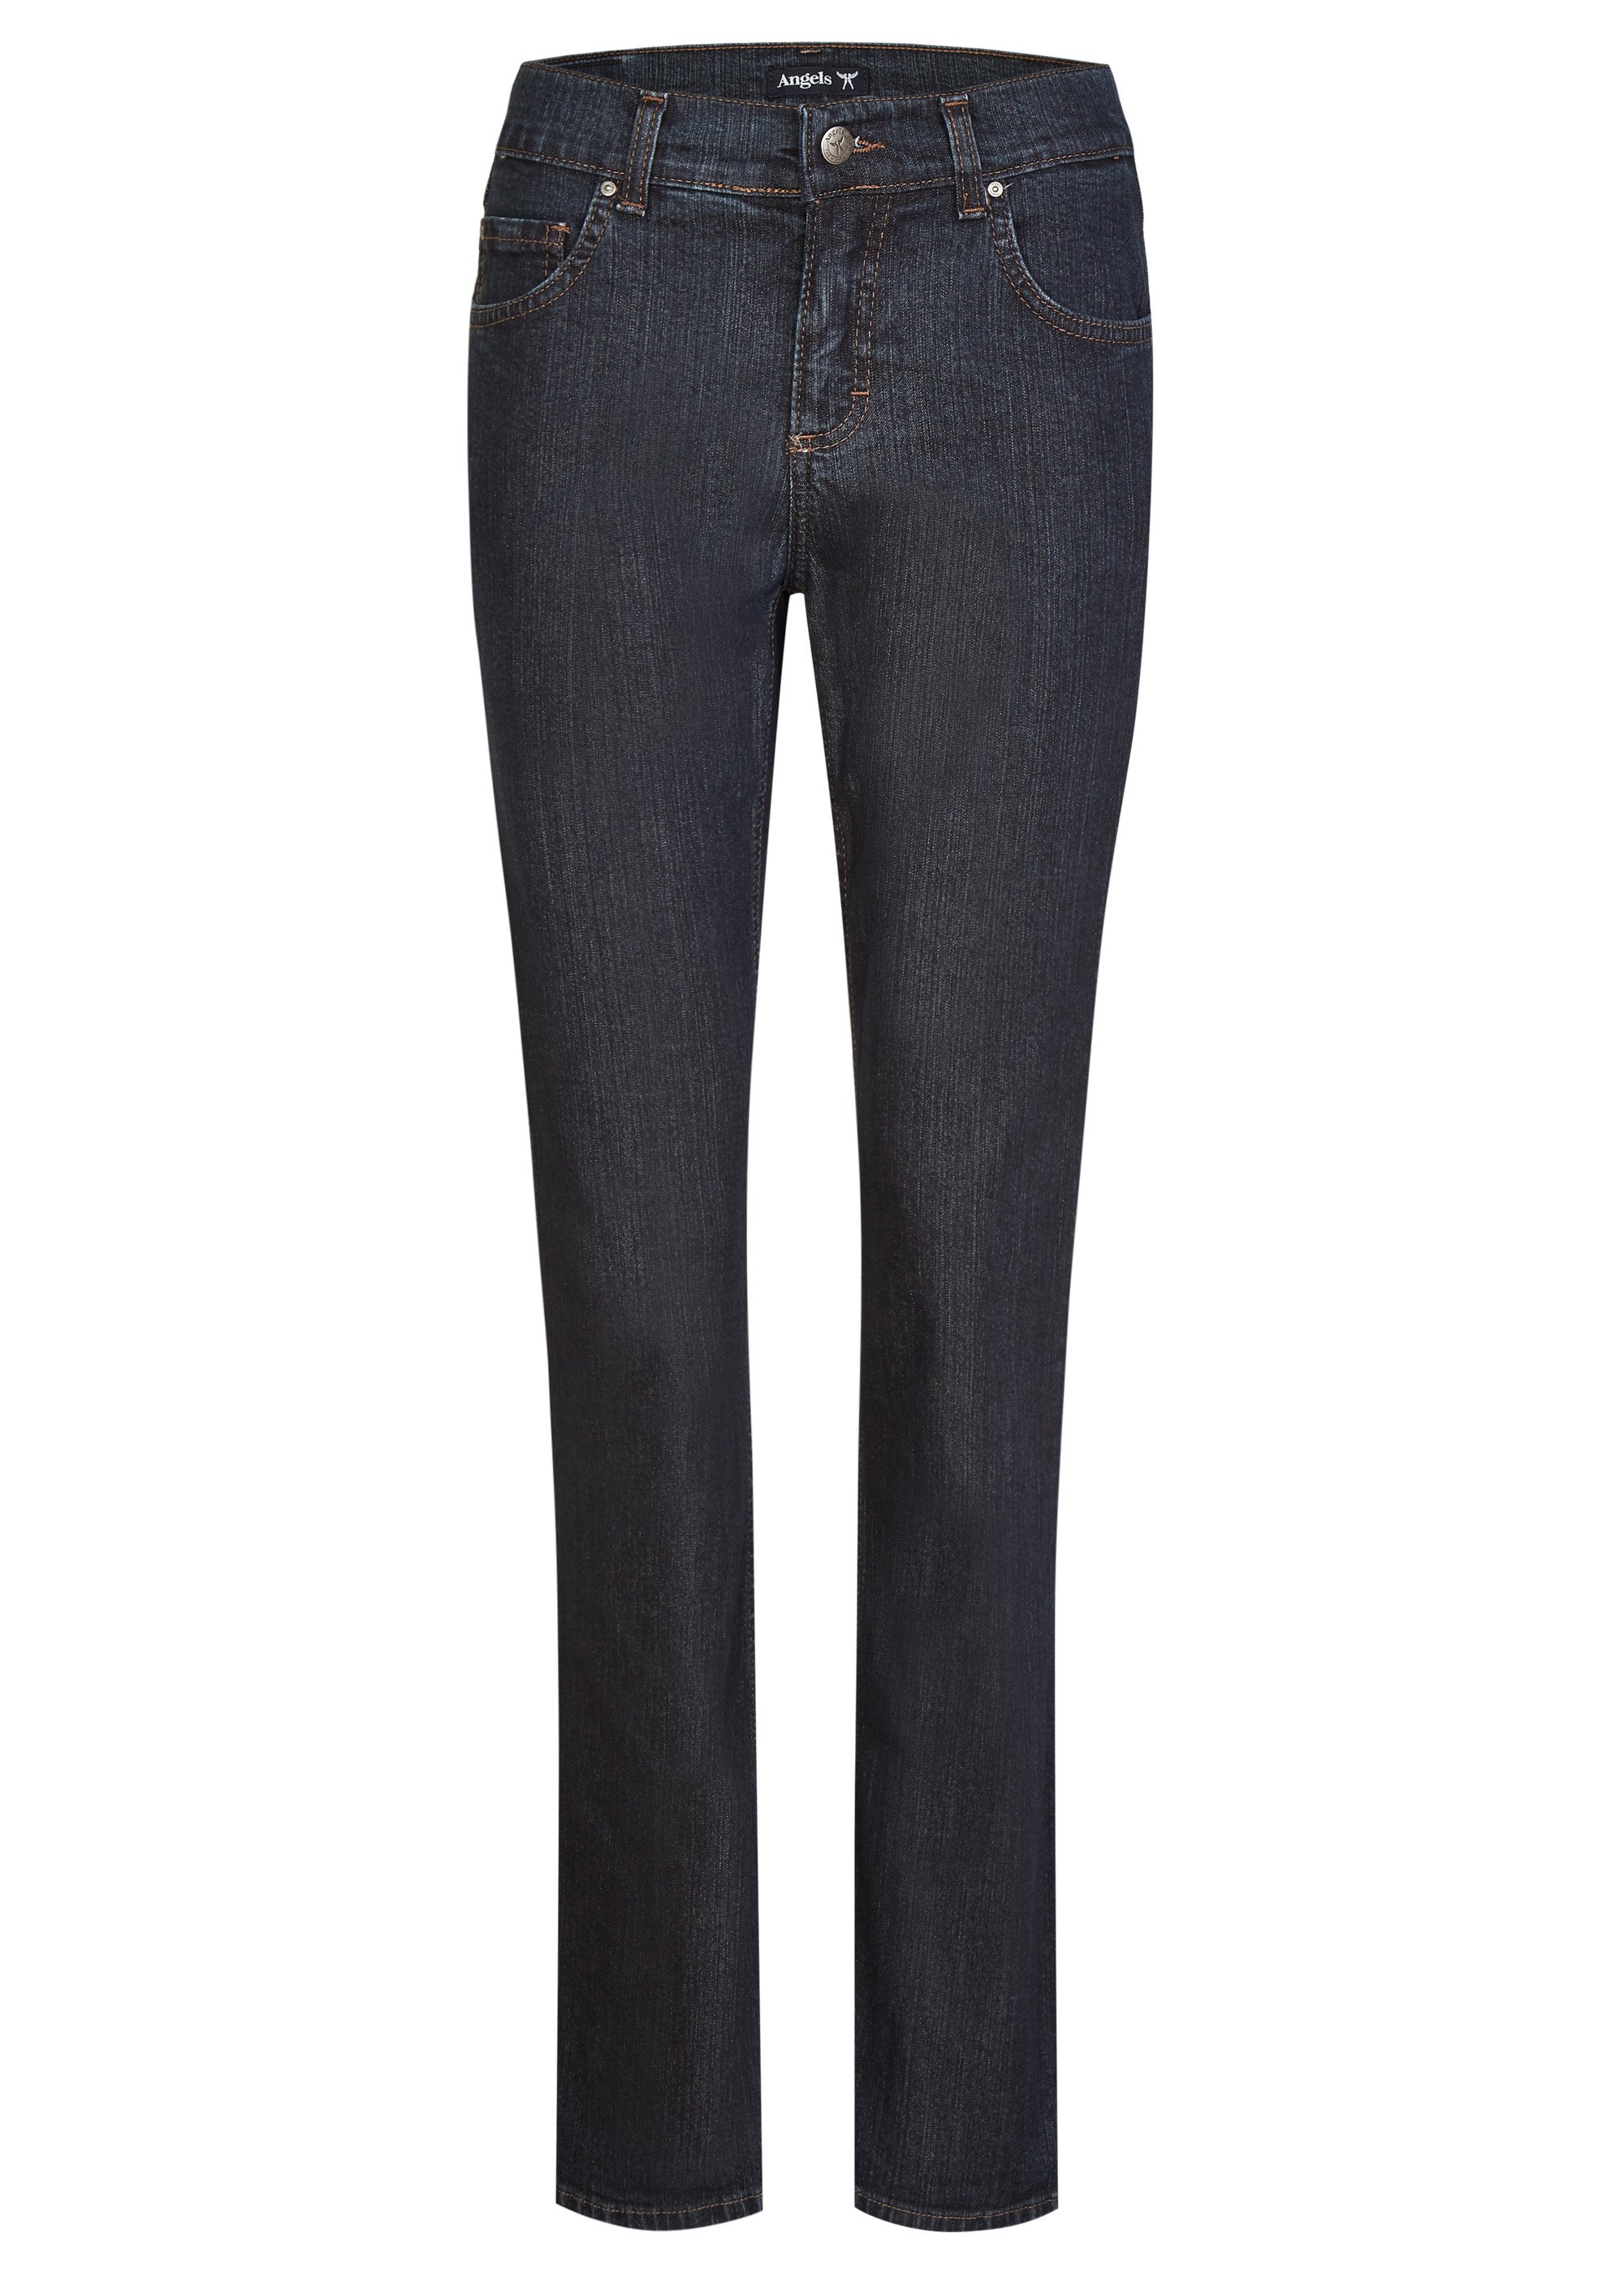 ANGELS JEANS LUCI night blue 53 90.30 | Angels Luci | Angels Jeans ...